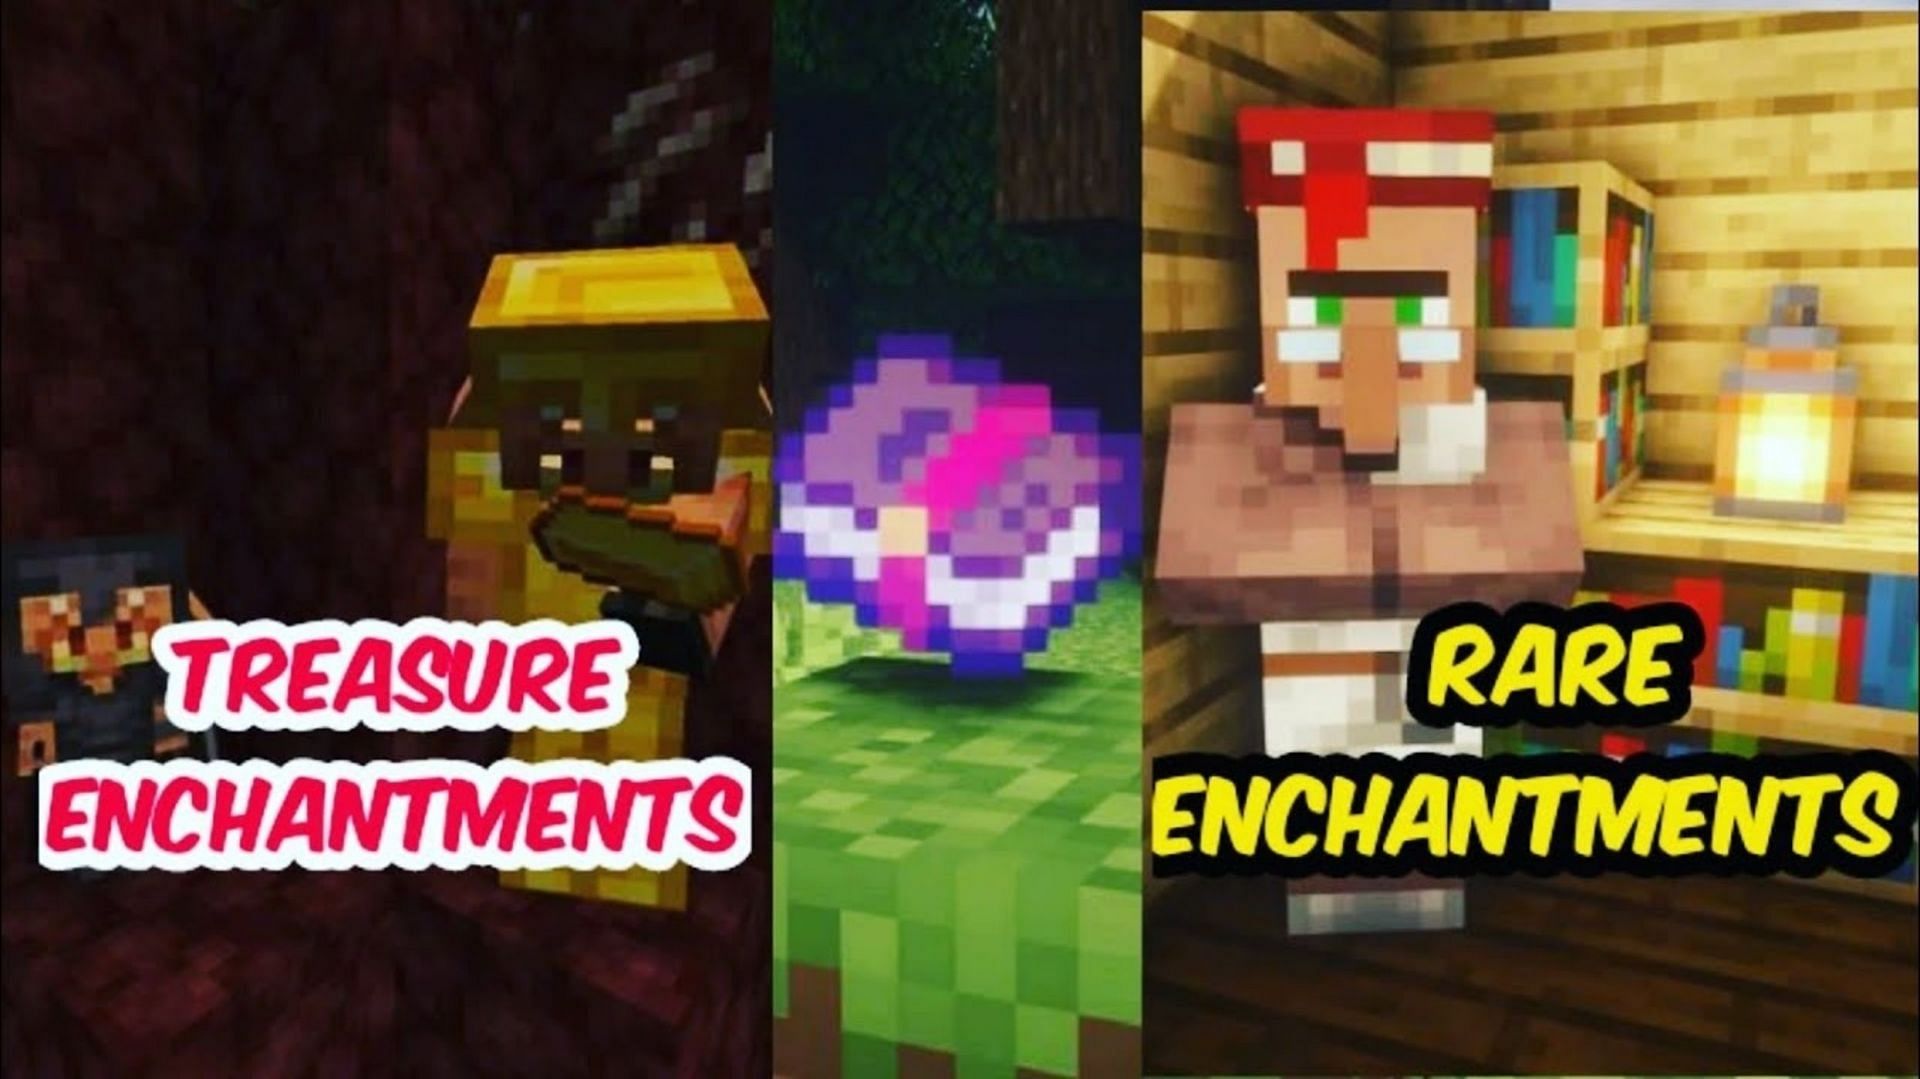 Treasure enchantments are known to be the rarest in the game (Image via Mojang)